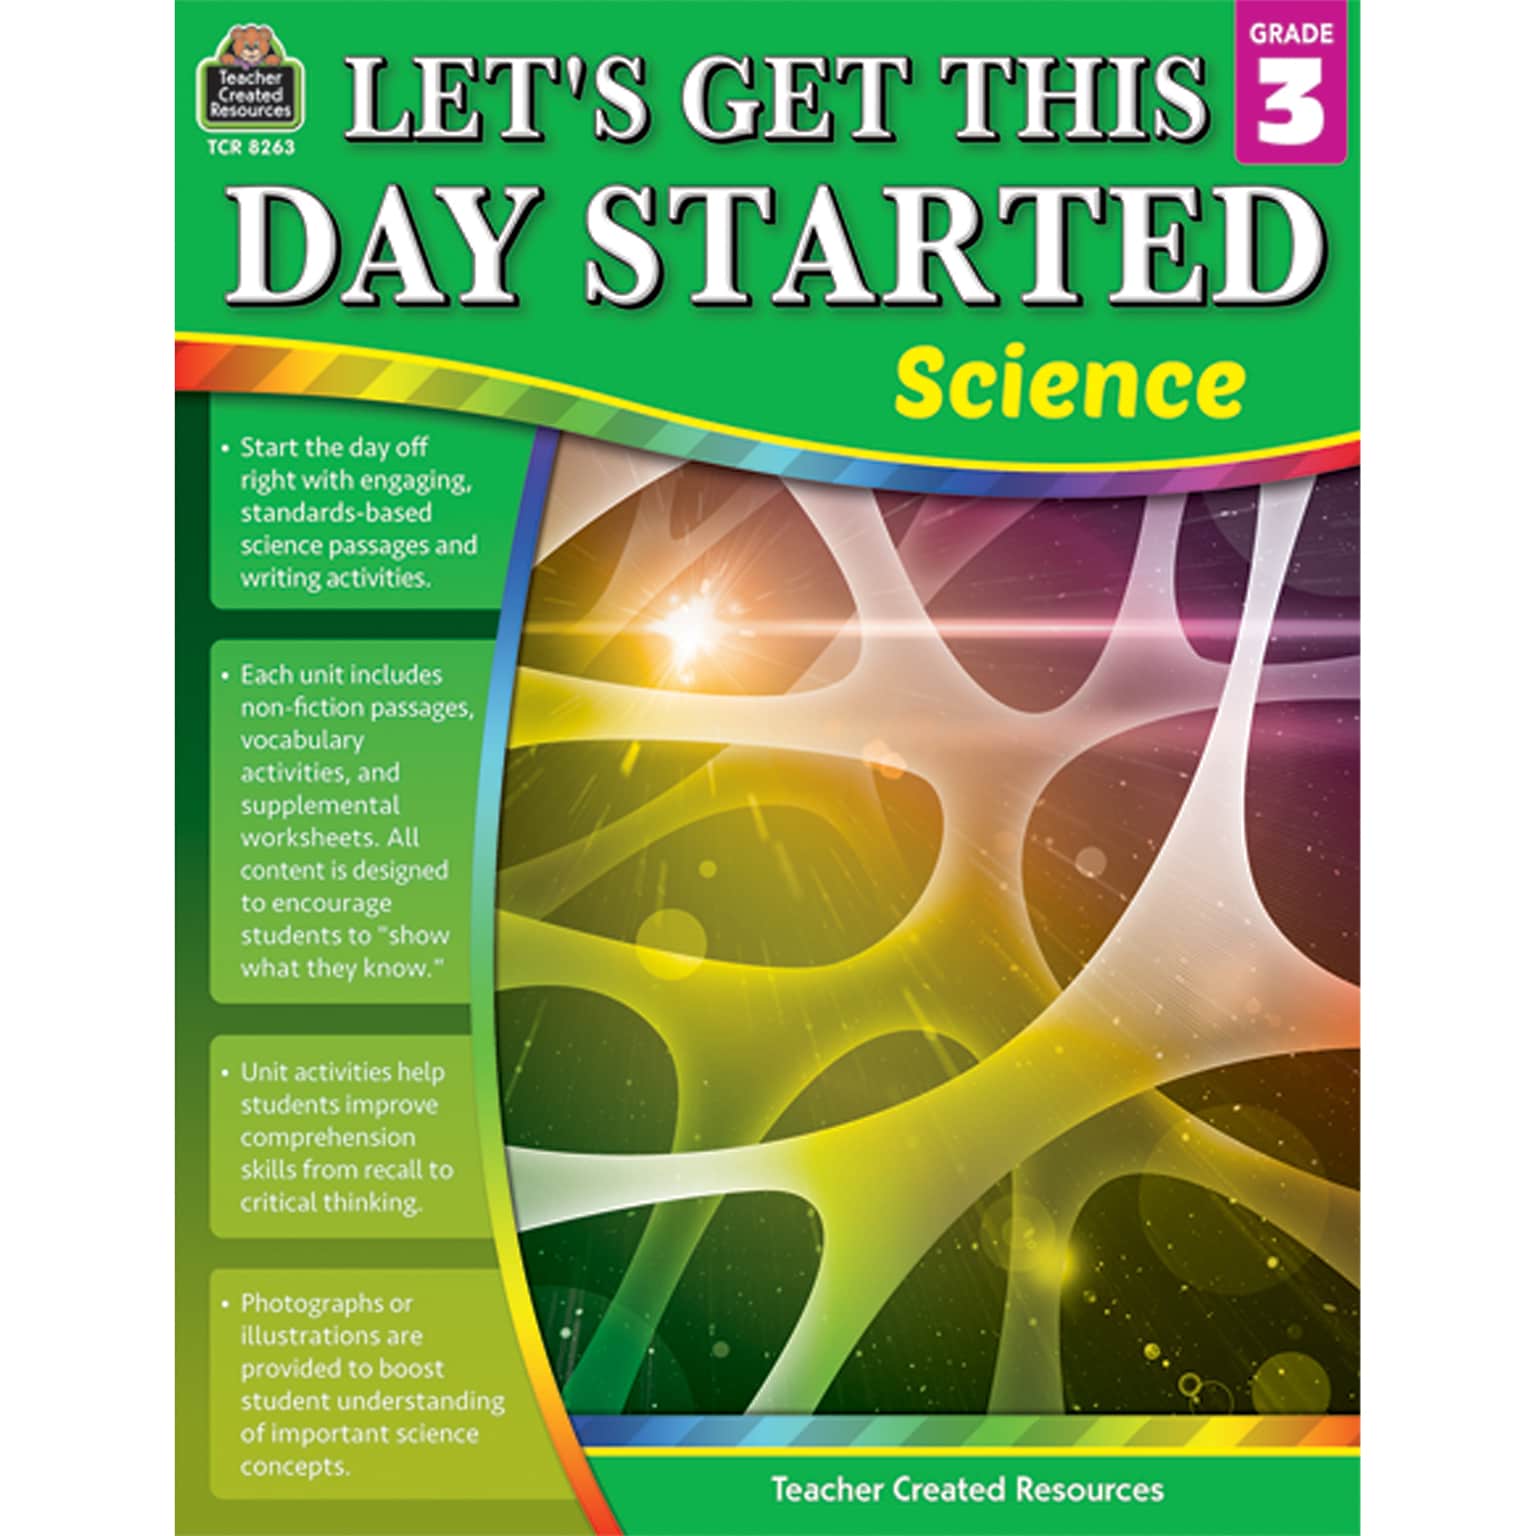 Teacher Created Resources Lets Get This Day Started: Science Workbook for Grade 3 (TCR8263)